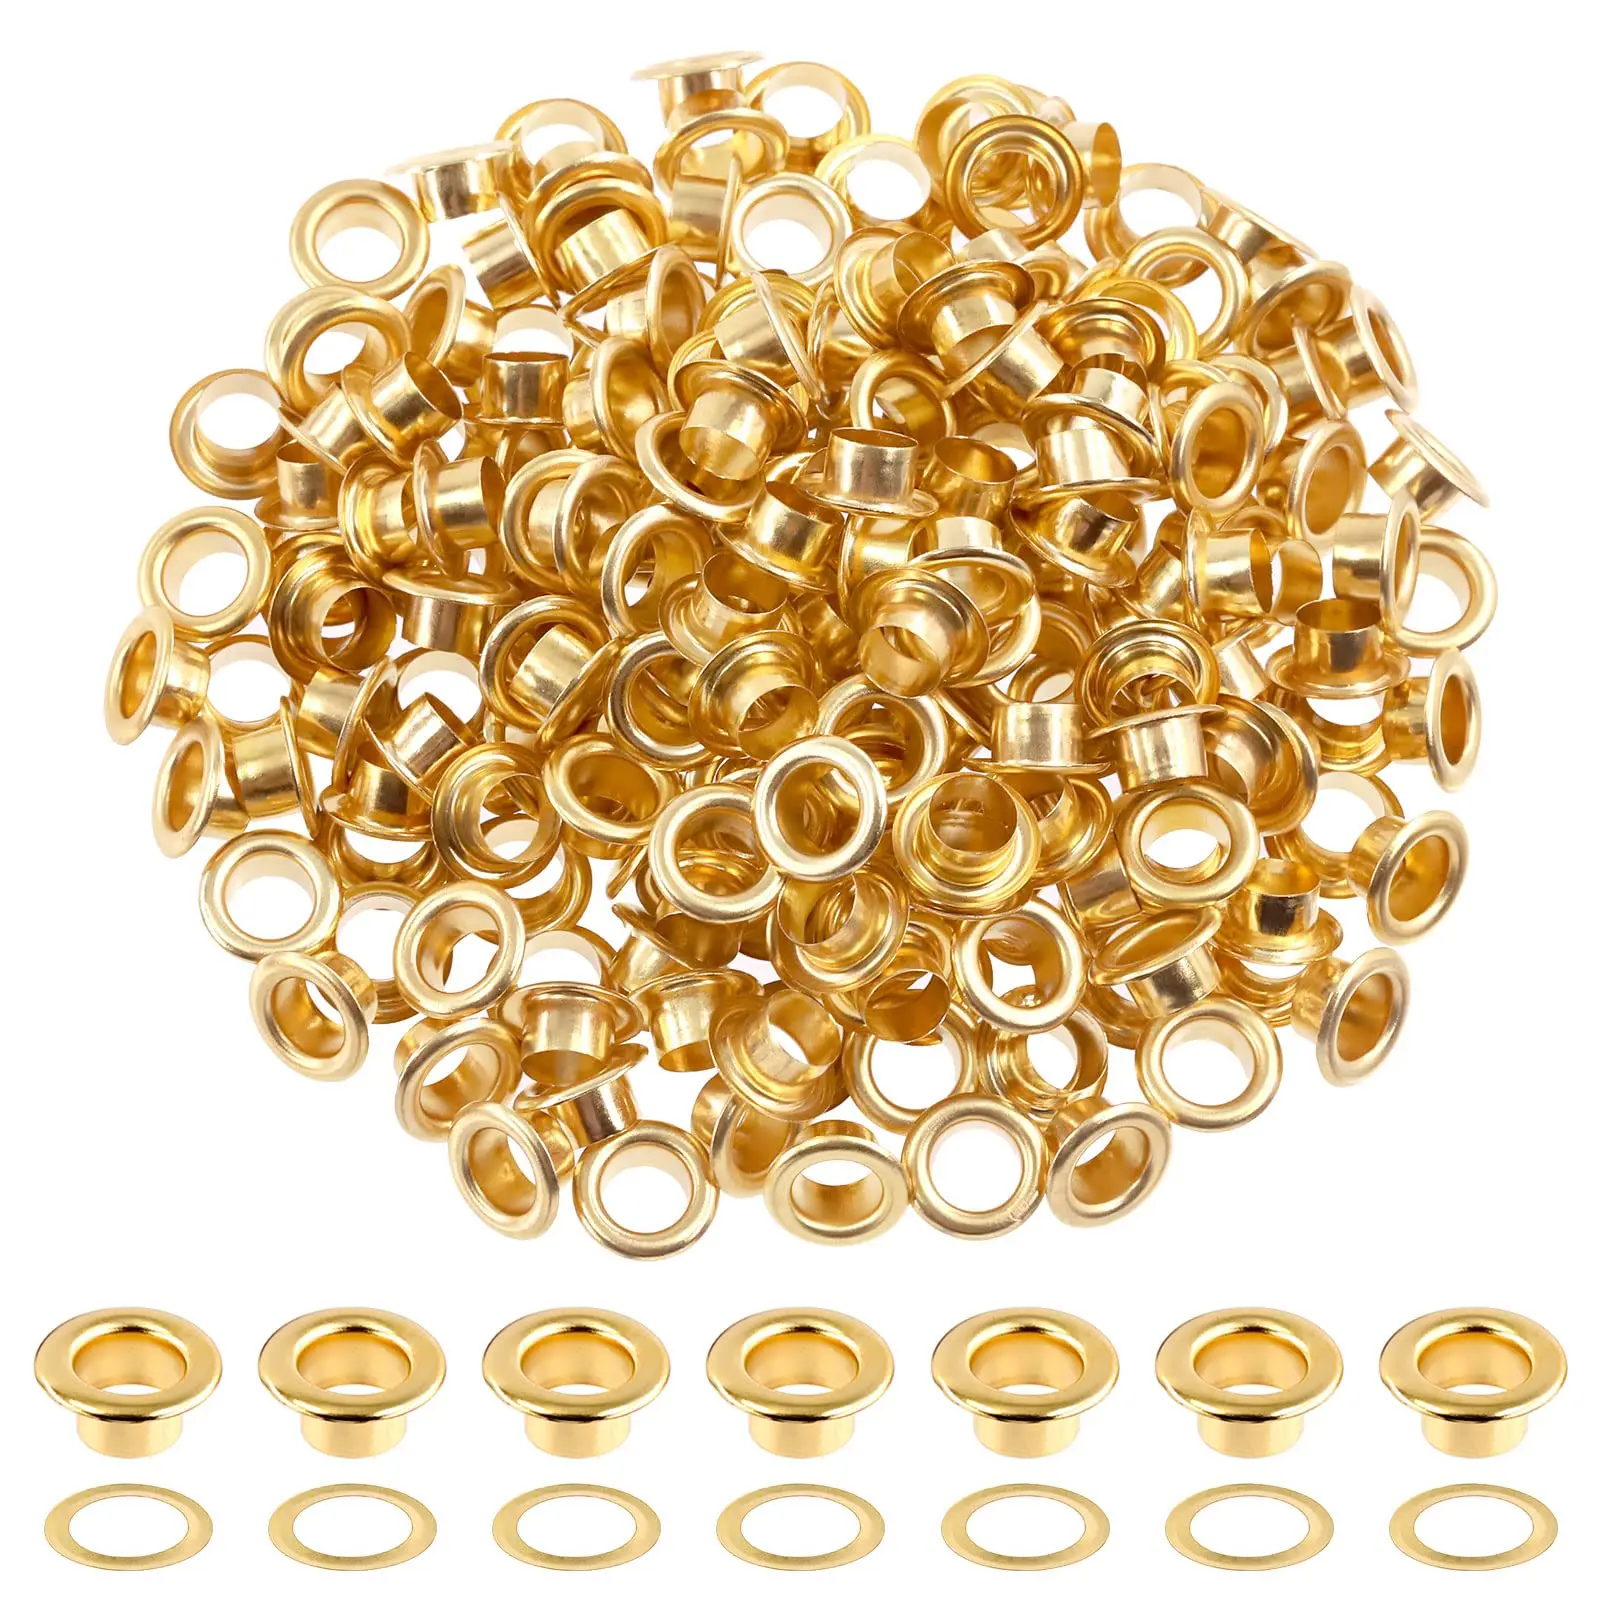 

Brass 100 Sets Gold Grommet Eyelets Metal Eyelets with Washers Assortment Kit, Hole Self Backing Eyelet for Bead Cores, Cloth